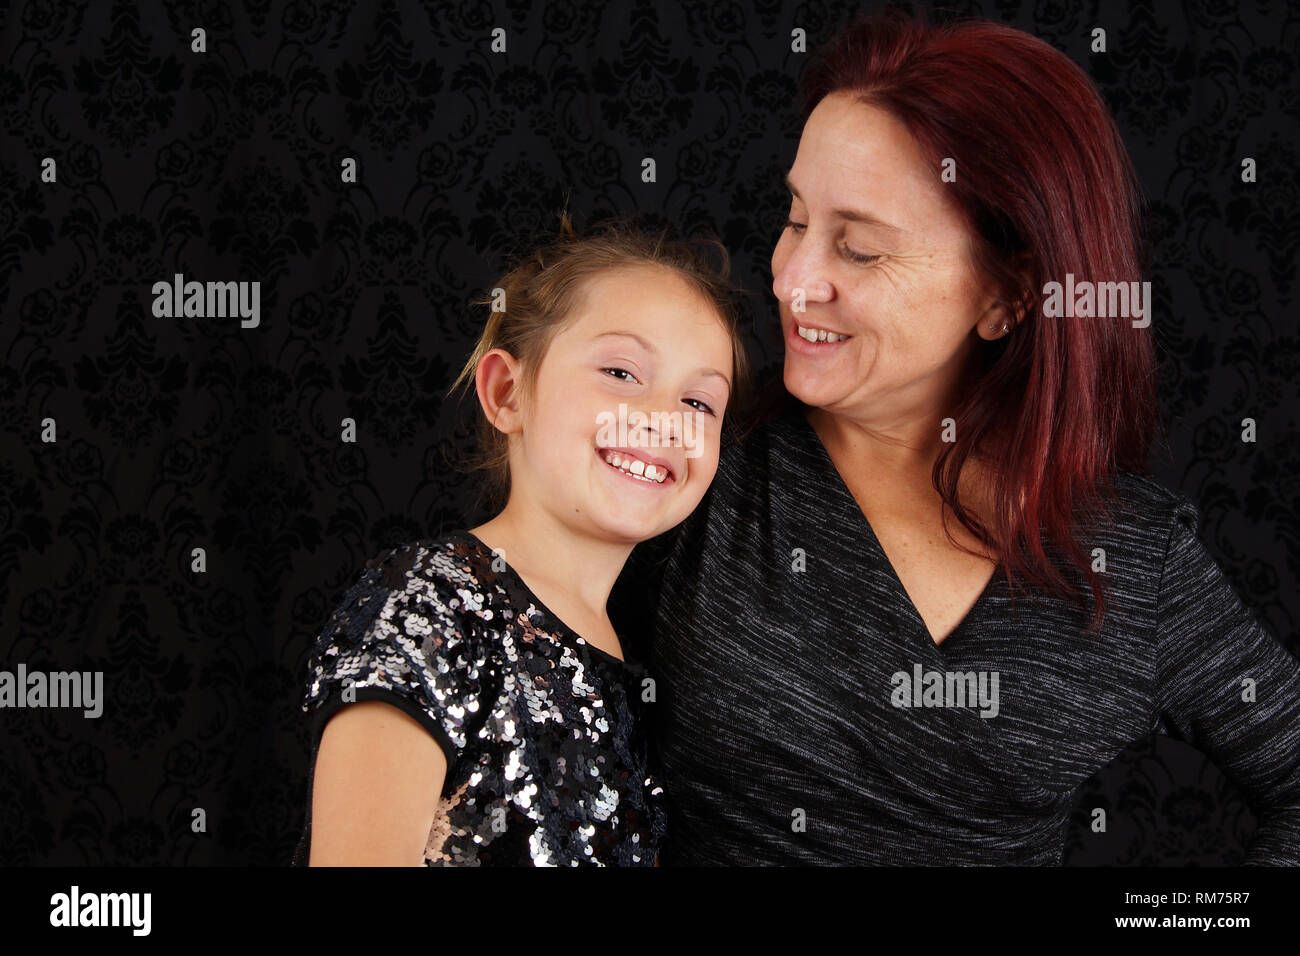 Cute candid mother daughter portrait over black background Stock Photo